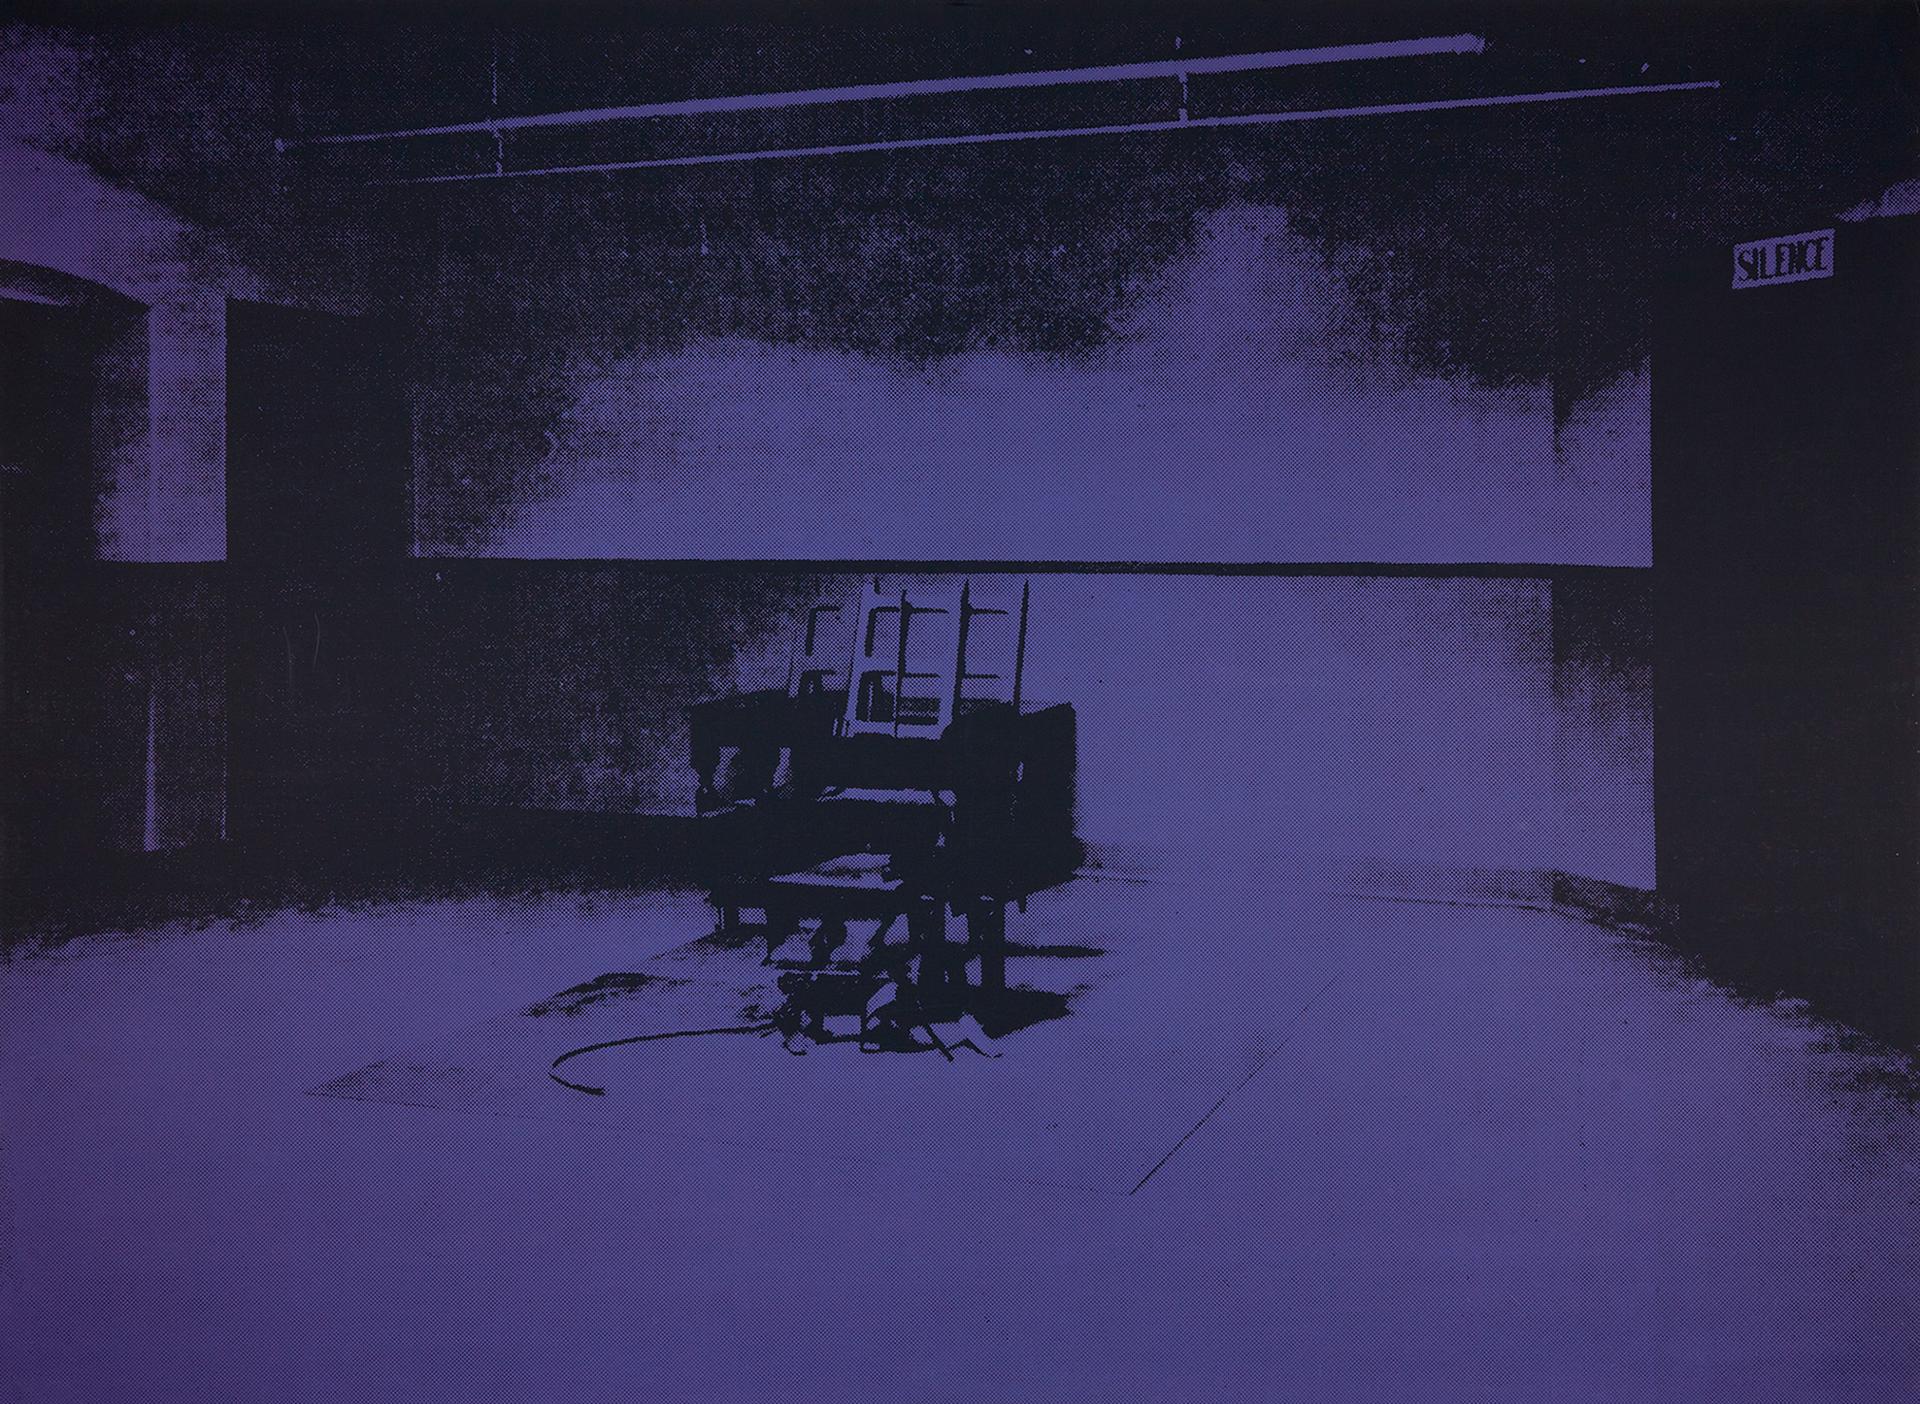 Andy Warhol (1928-1987) - Electric Chair, 1971